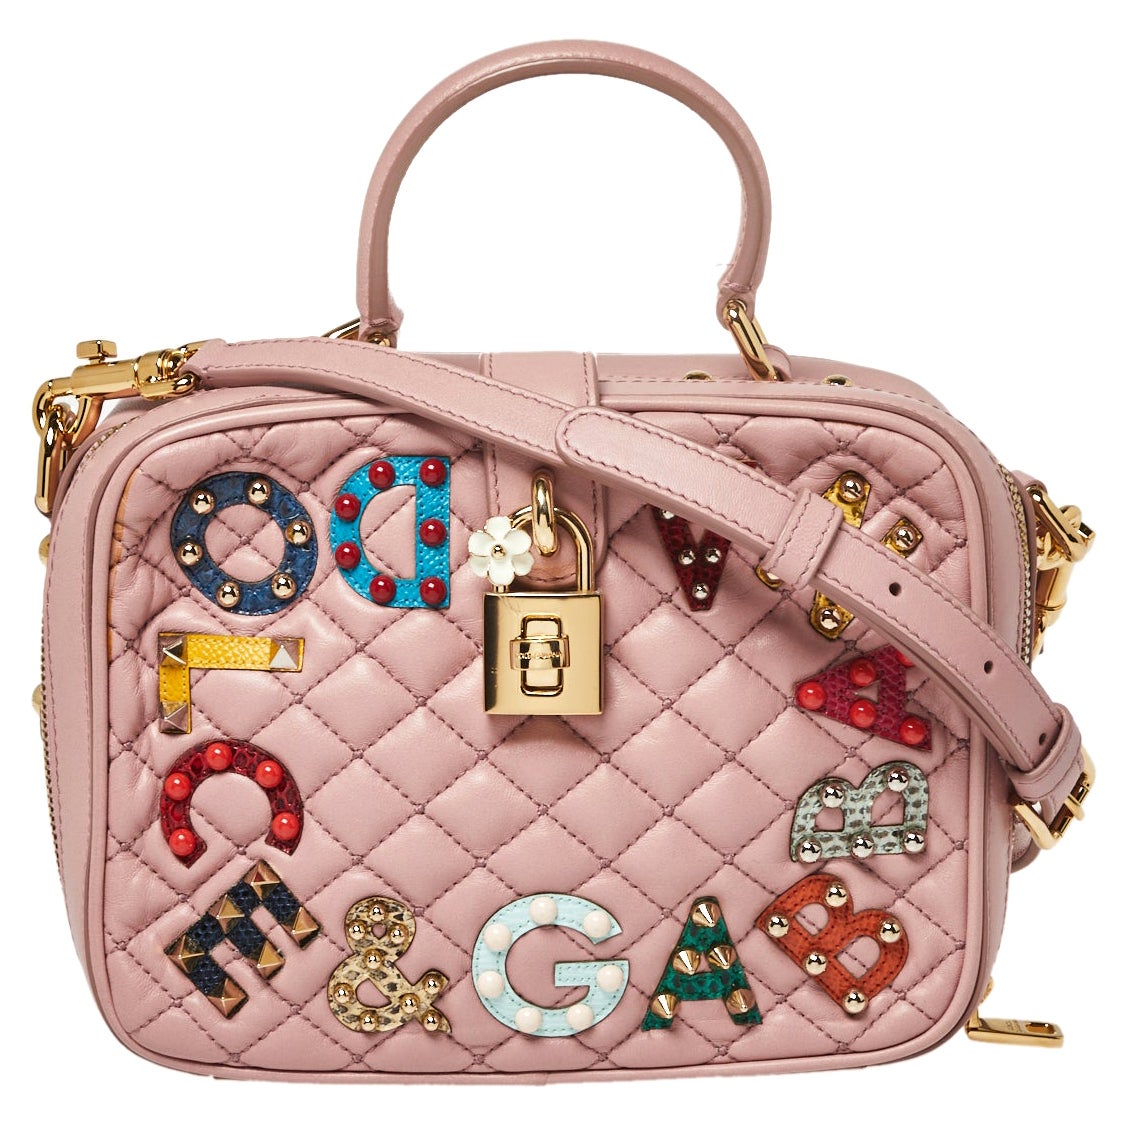 Dolce & Gabbana Pink Quilted Leather Embellished Treasure Box Crossbody Bag